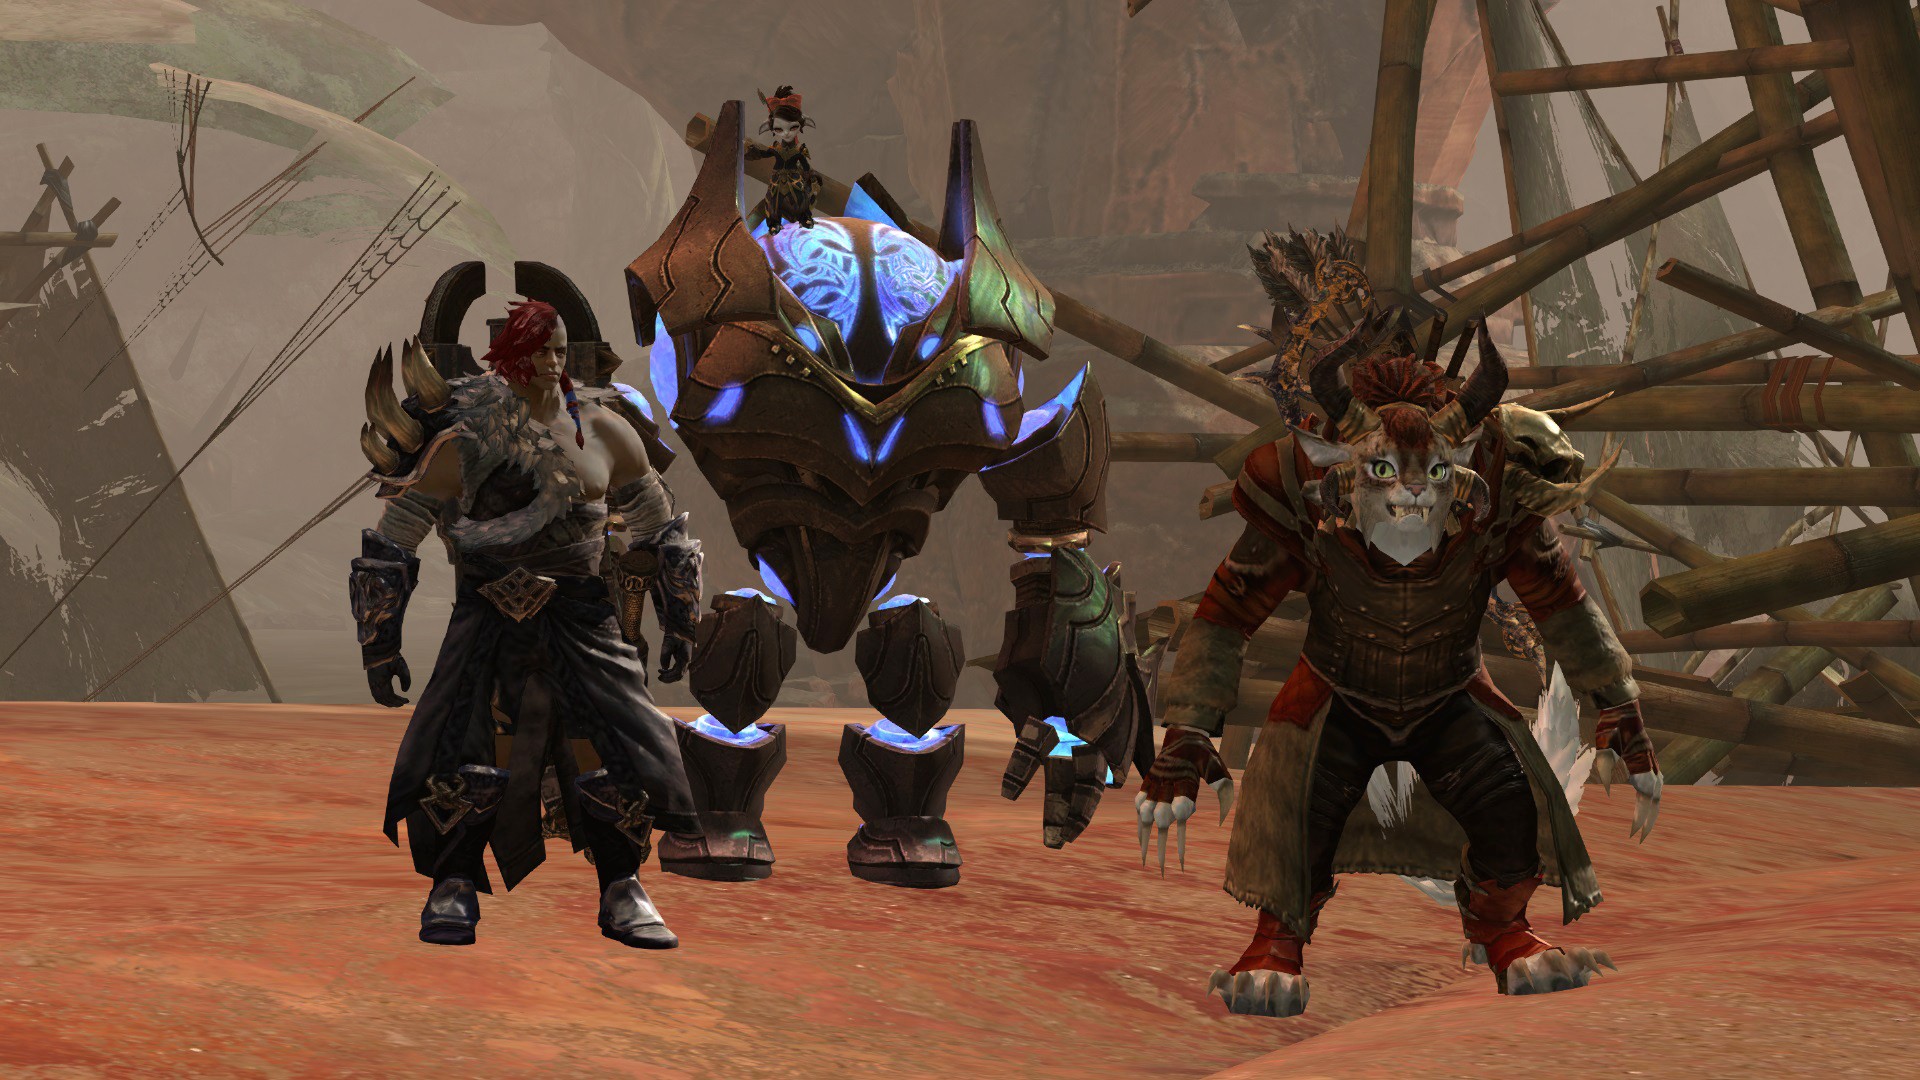 Guild Wars 2 Gates Maguuma Launched, Introduces Season 2 of Living World Content